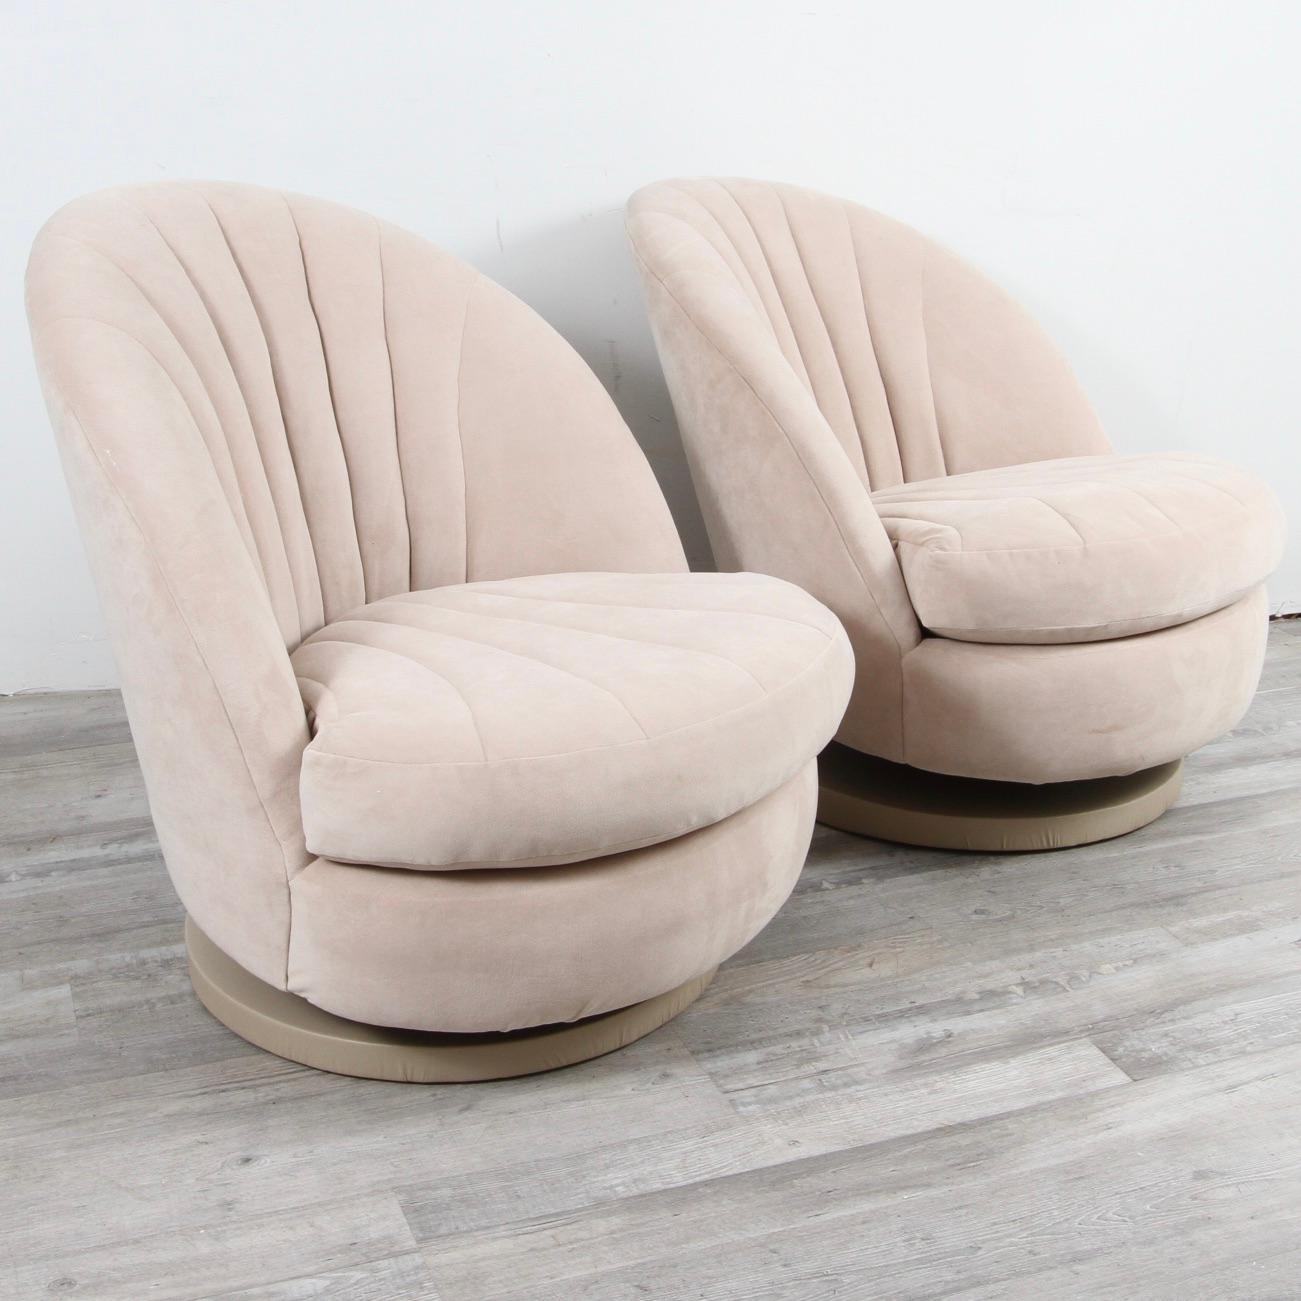 This pair of seventies vintage swivel/rocker chairs were designed by Milo Baughman for Thayer Coggin. These chairs are reminiscent of open scallop shells, the seats are deep and comfortable. Chairs rotate 360 degrees, tilt back and are mounted on